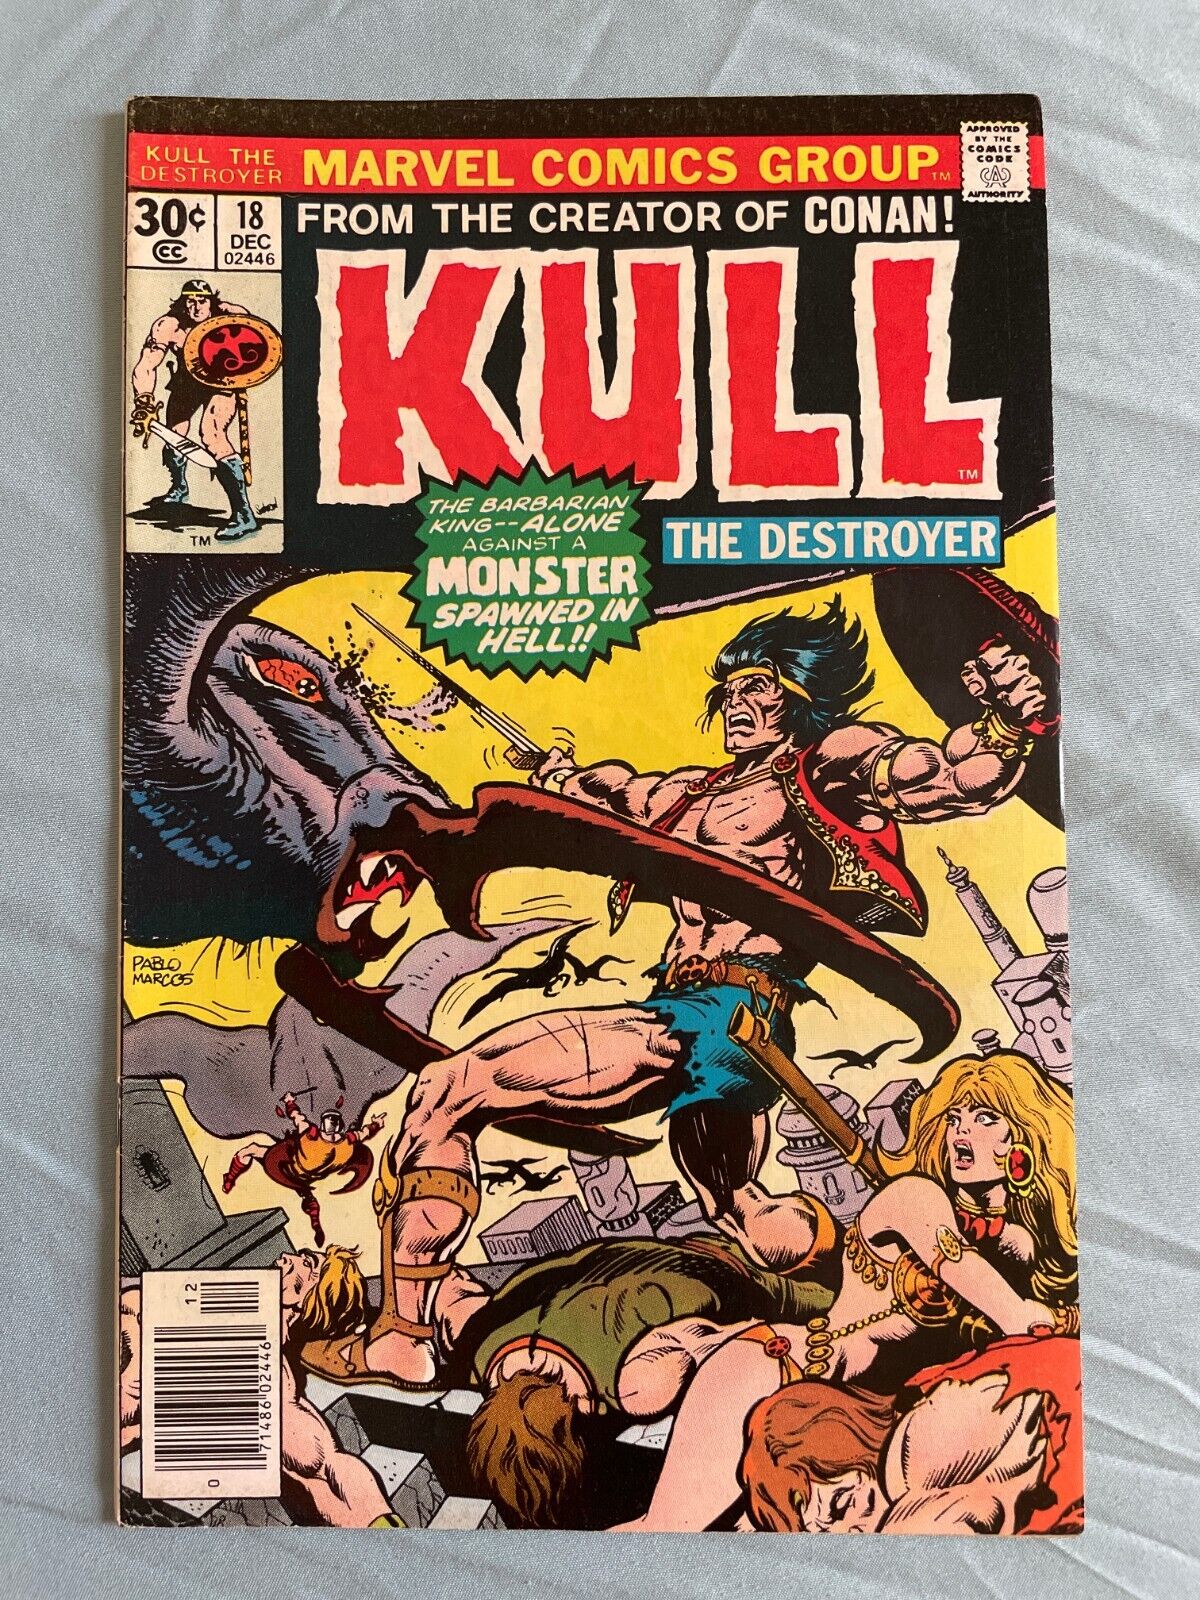 Kull The Destroyer #18 (Dec 1976, Marvel Comics) - fantasy in the style of Conan